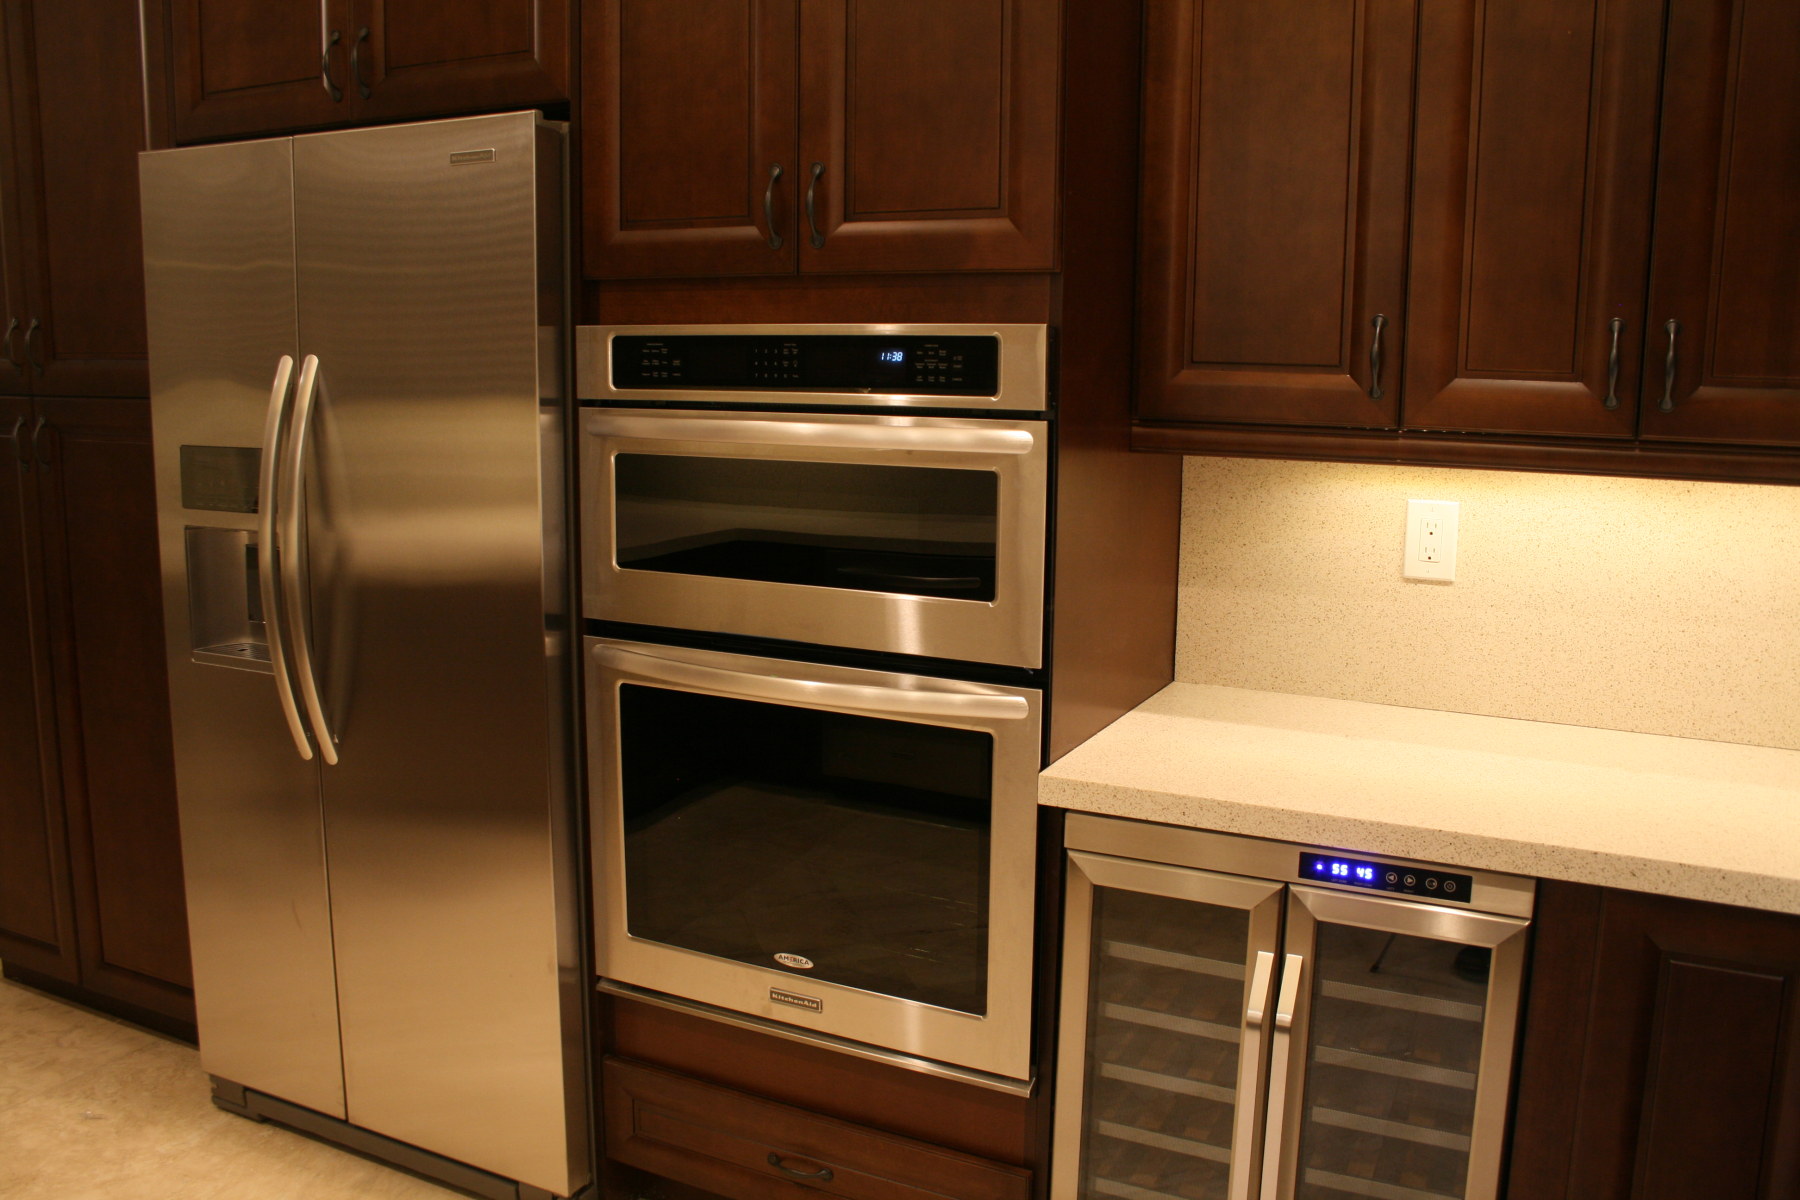 New stainless steel refrigerator, double oven and wine cooler